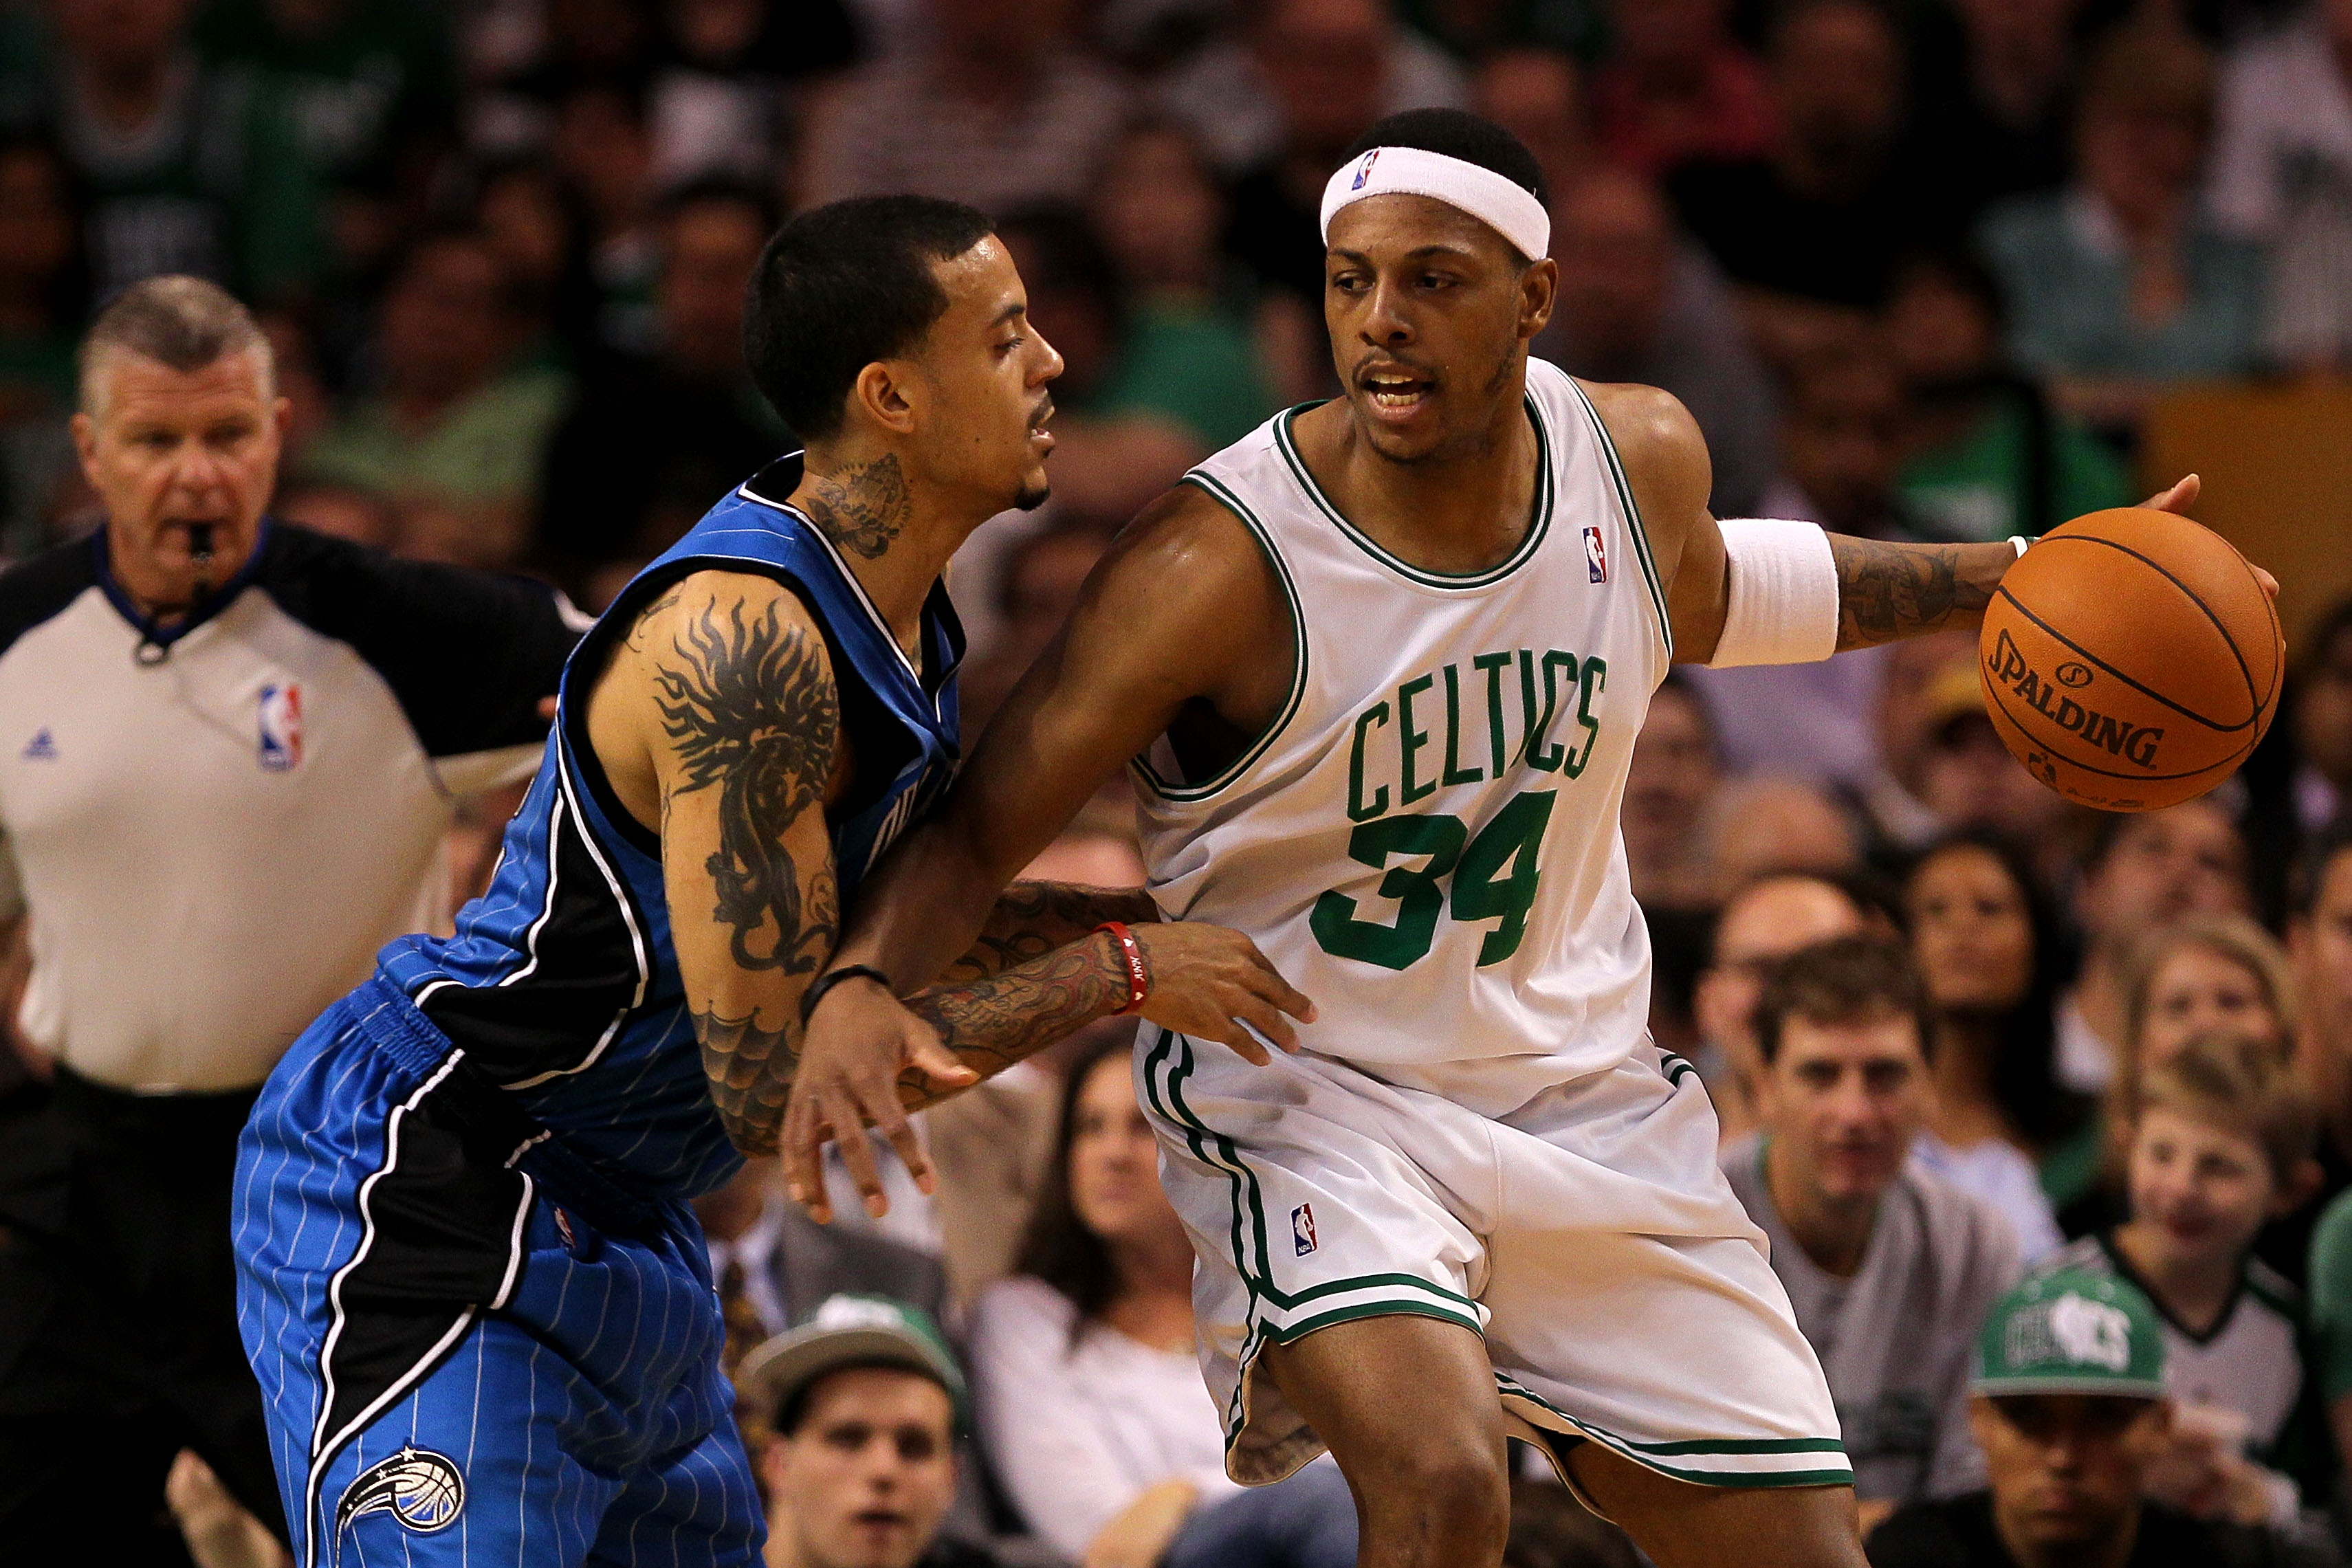 BOSTON - MAY 24:  Paul Pierce #34 of the Boston Celtics looks to pass against Matt Barnes #22 of the Orlando Magic in Game Four of the Eastern Conference Finals during the 2010 NBA Playoffs at TD Banknorth Garden on May 24, 2010 in Boston, Massachusetts. 